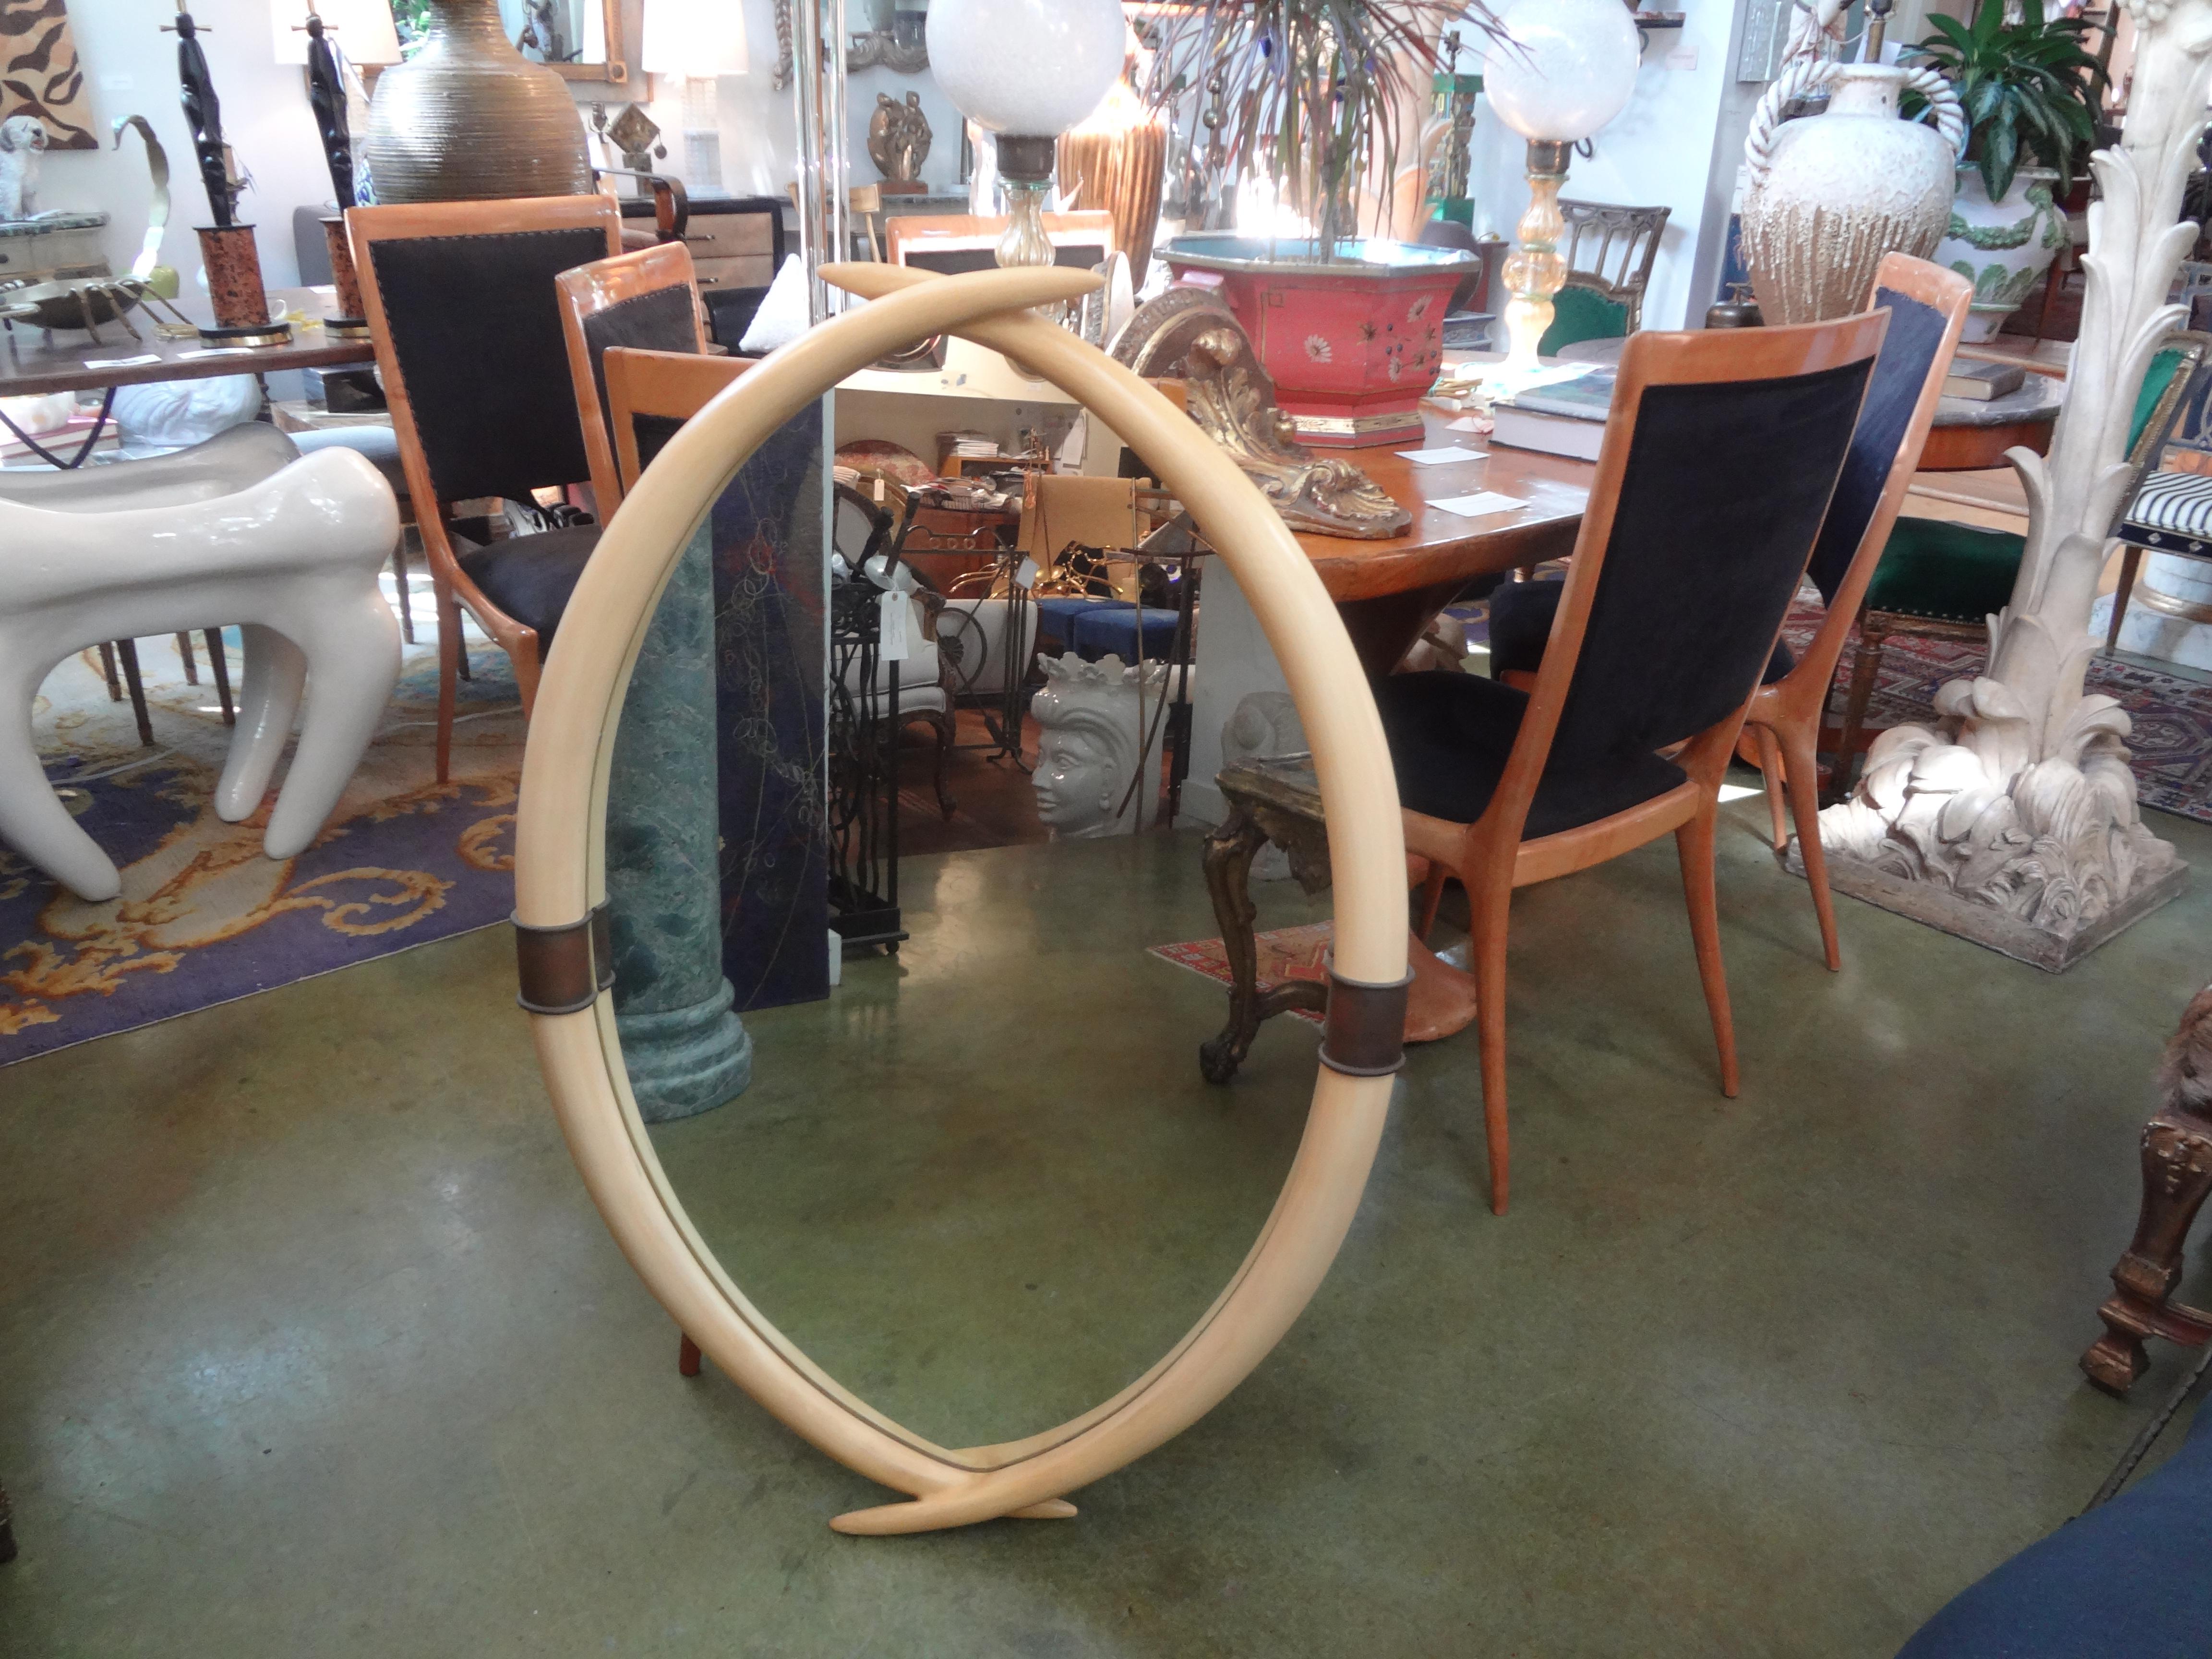 Great Hollywood Regency faux tusk mirror with brass keystones in the manner of Karl Springer. This interesting tusk mirror was made by Chapman in 1976. The original label is attached to the back. Featured mirror is in very good vintage condition and